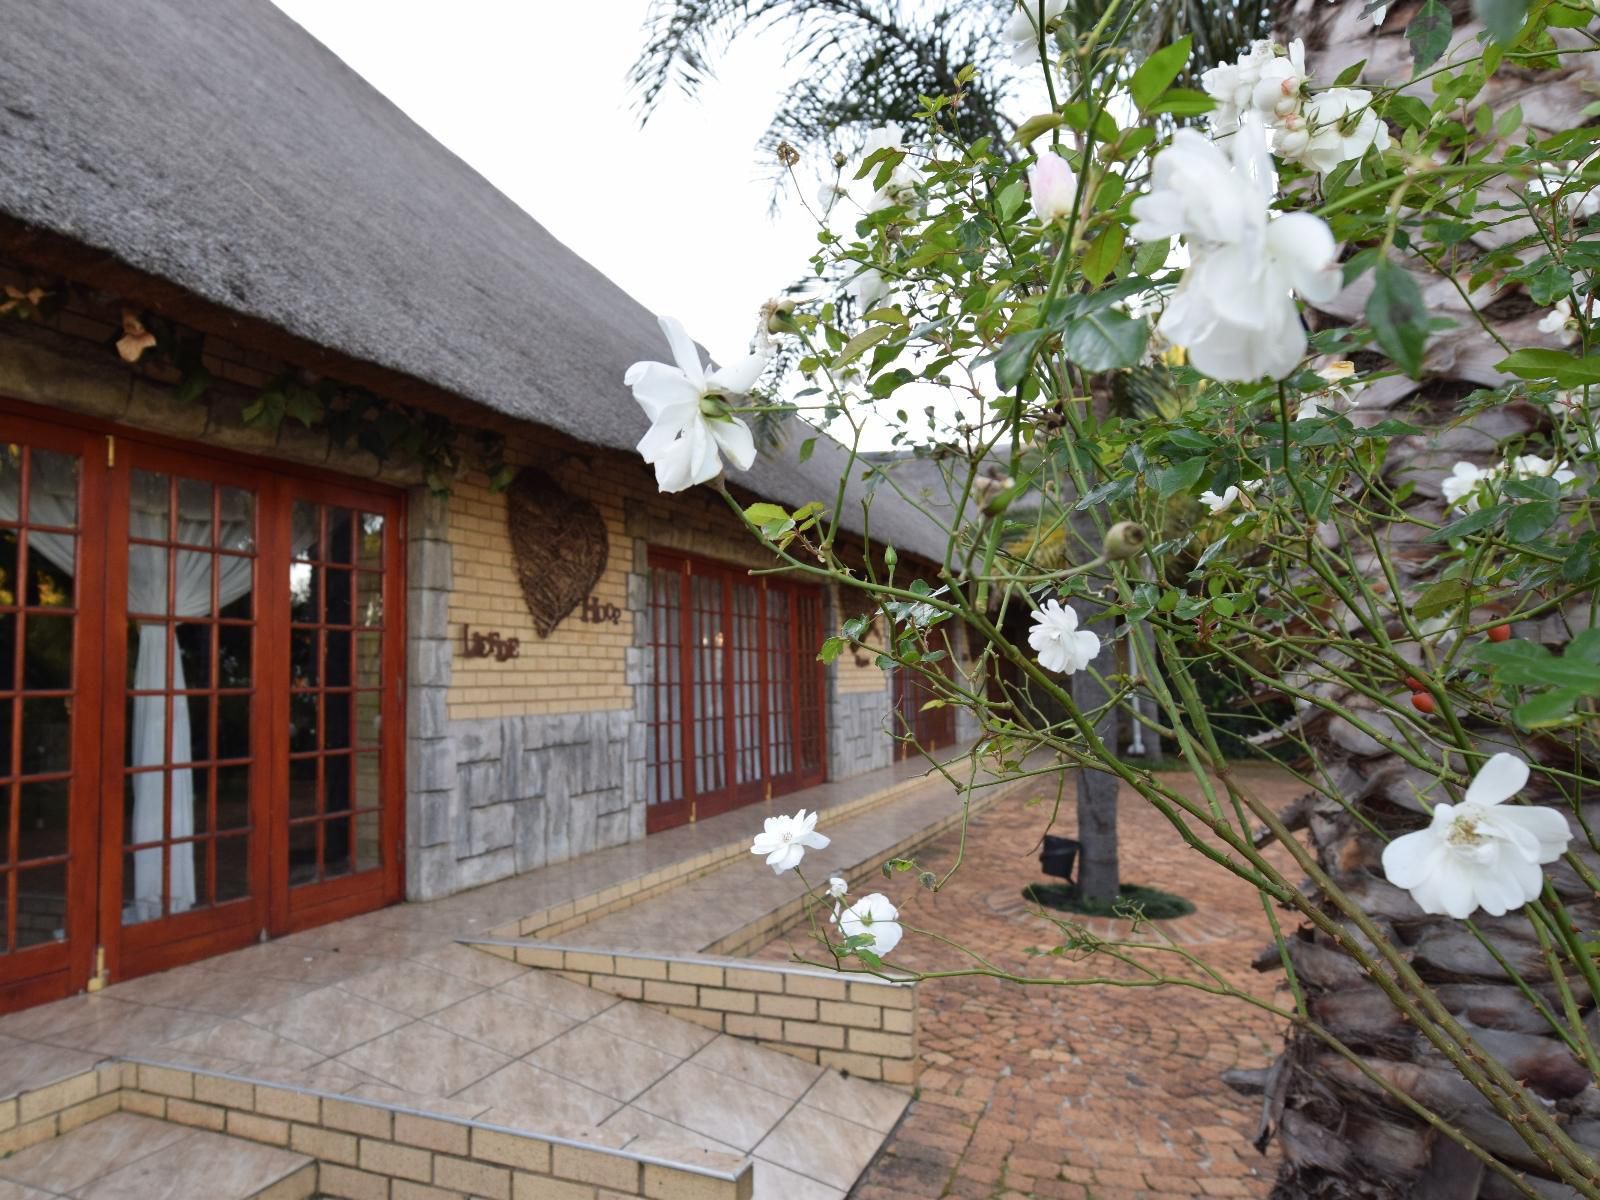 Accommodation At Thabong Venue Brakpan Johannesburg Gauteng South Africa Building, Architecture, Cabin, House, Plant, Nature, Rose, Flower